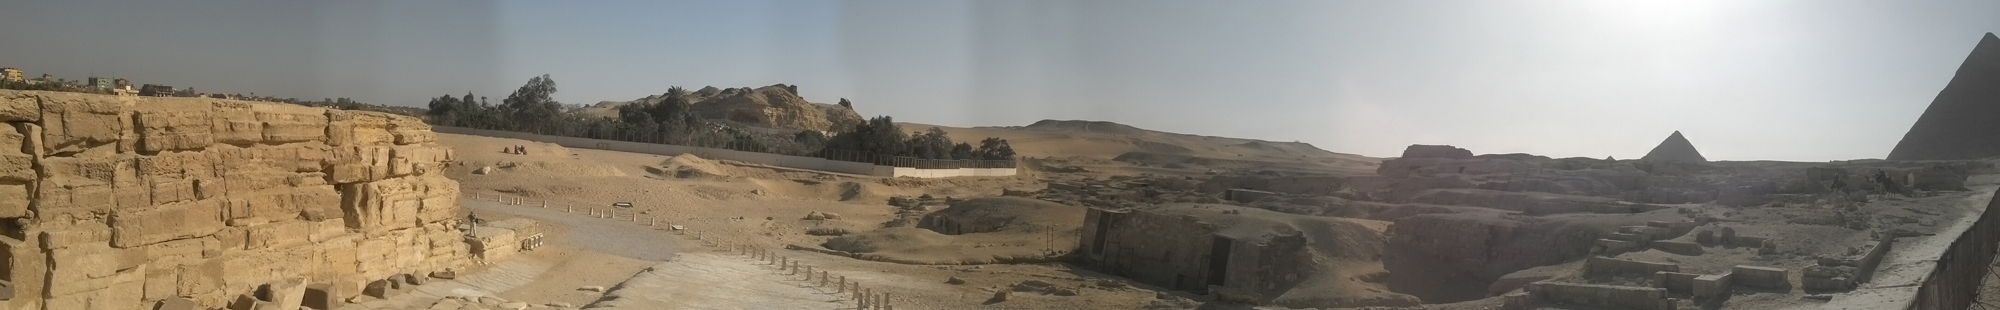 Khafre Pyramid Complex, Central Field: Site: Giza; View: Khafre Valley Temple, Central Field